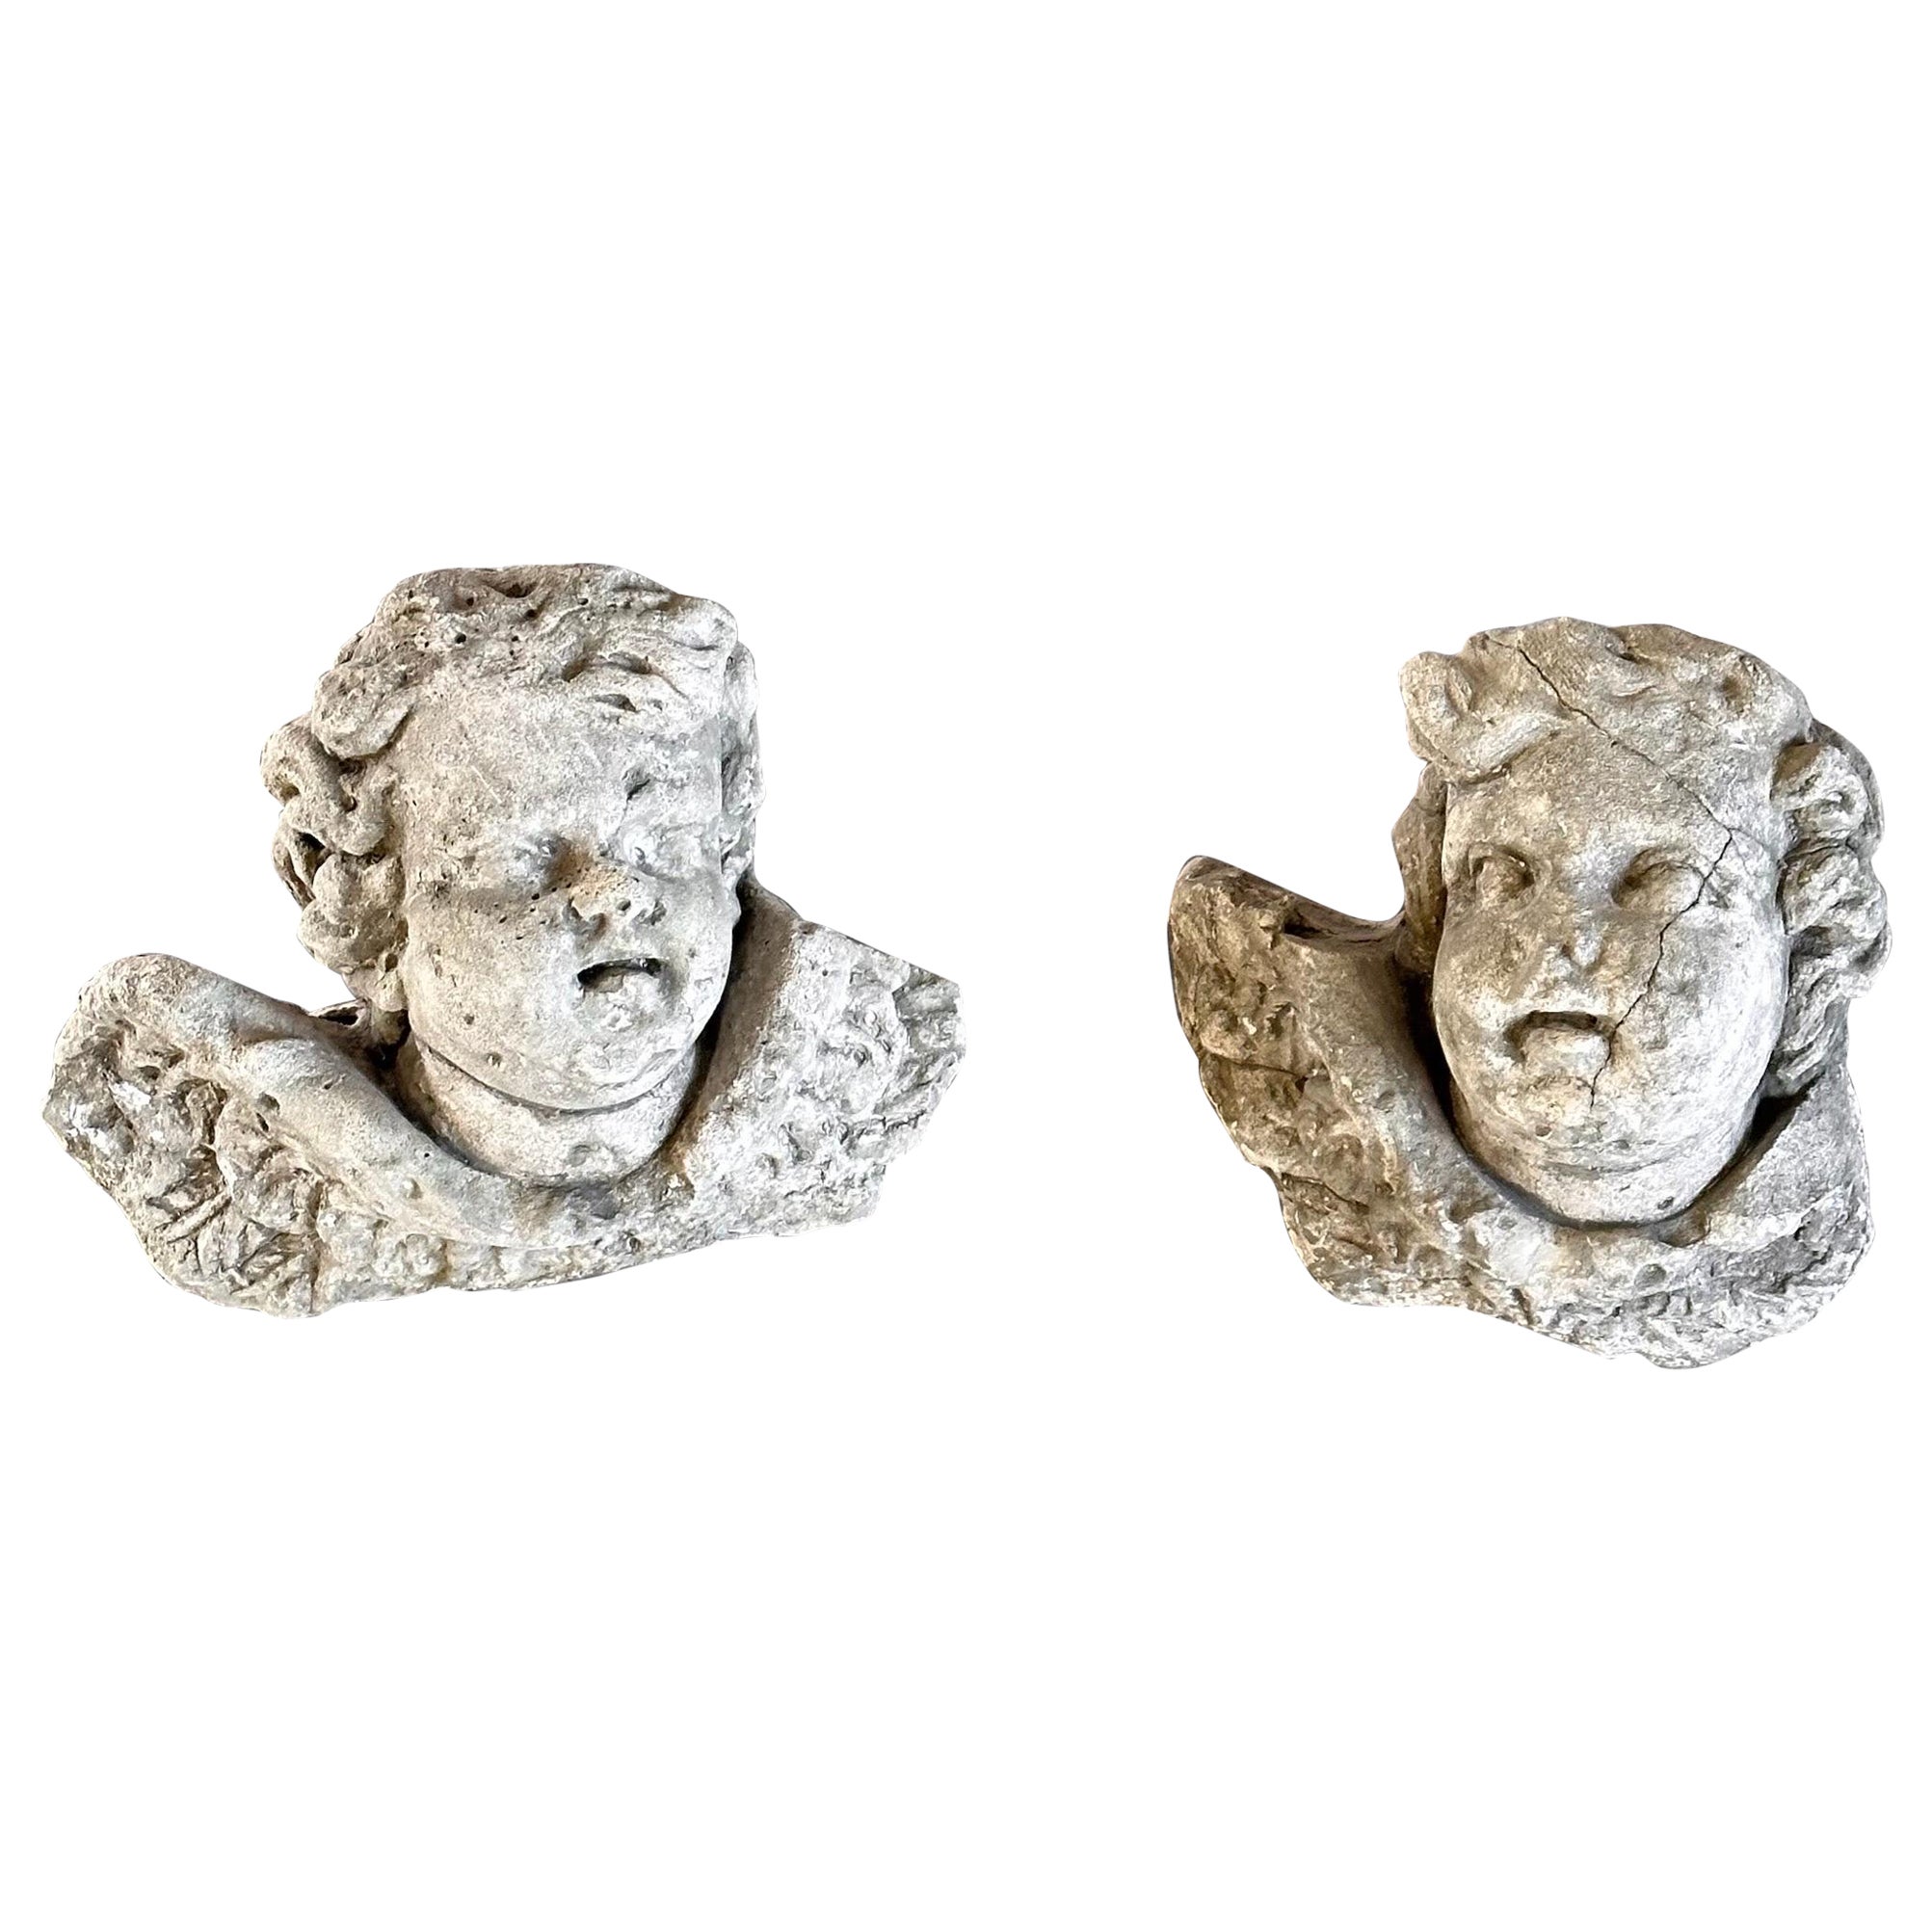 Exquisite Pair of Decorative Angel Head Busts, Mixed Media, 1930s For Sale